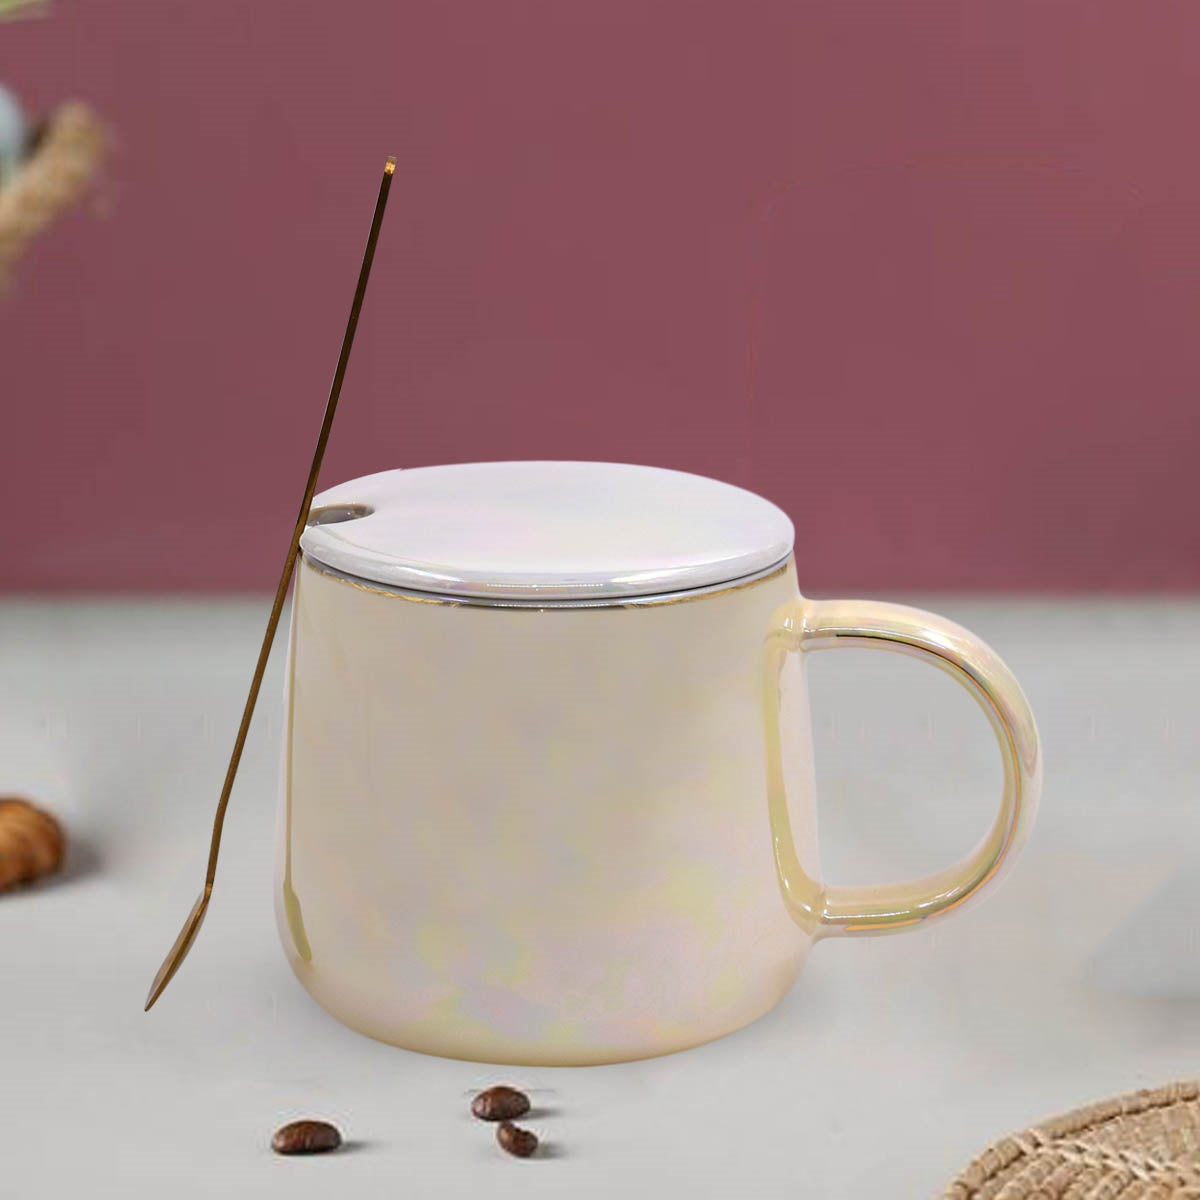 Fancy Ceramic Coffee or Tea Mug with Lid and Handle with Spoon (8434)